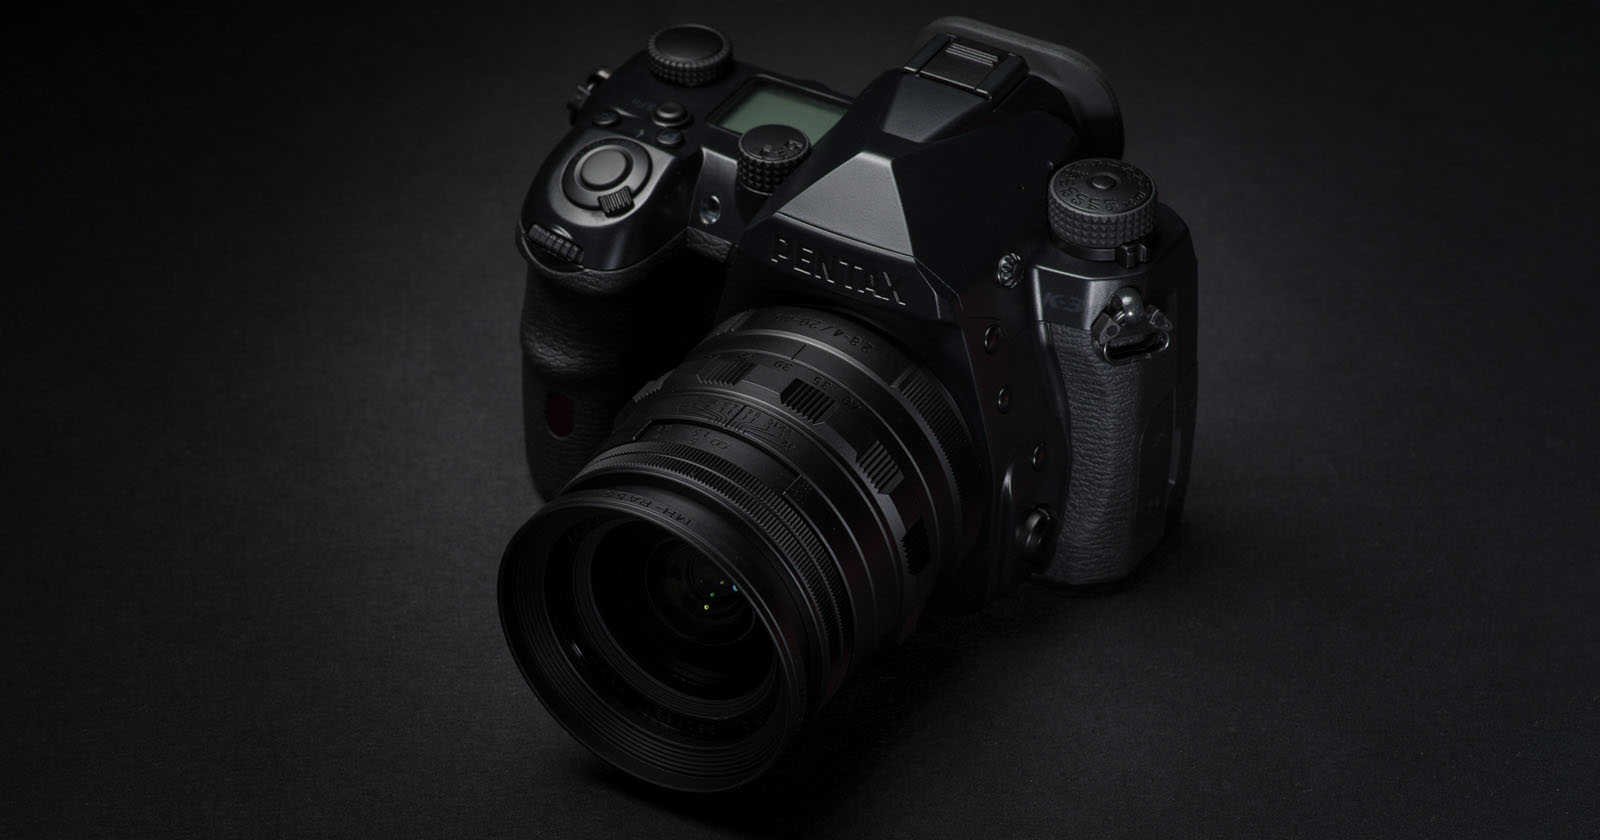 the-pentax-k-3-iii-jet-black-special-edition-is-now-available-in-the-u-s